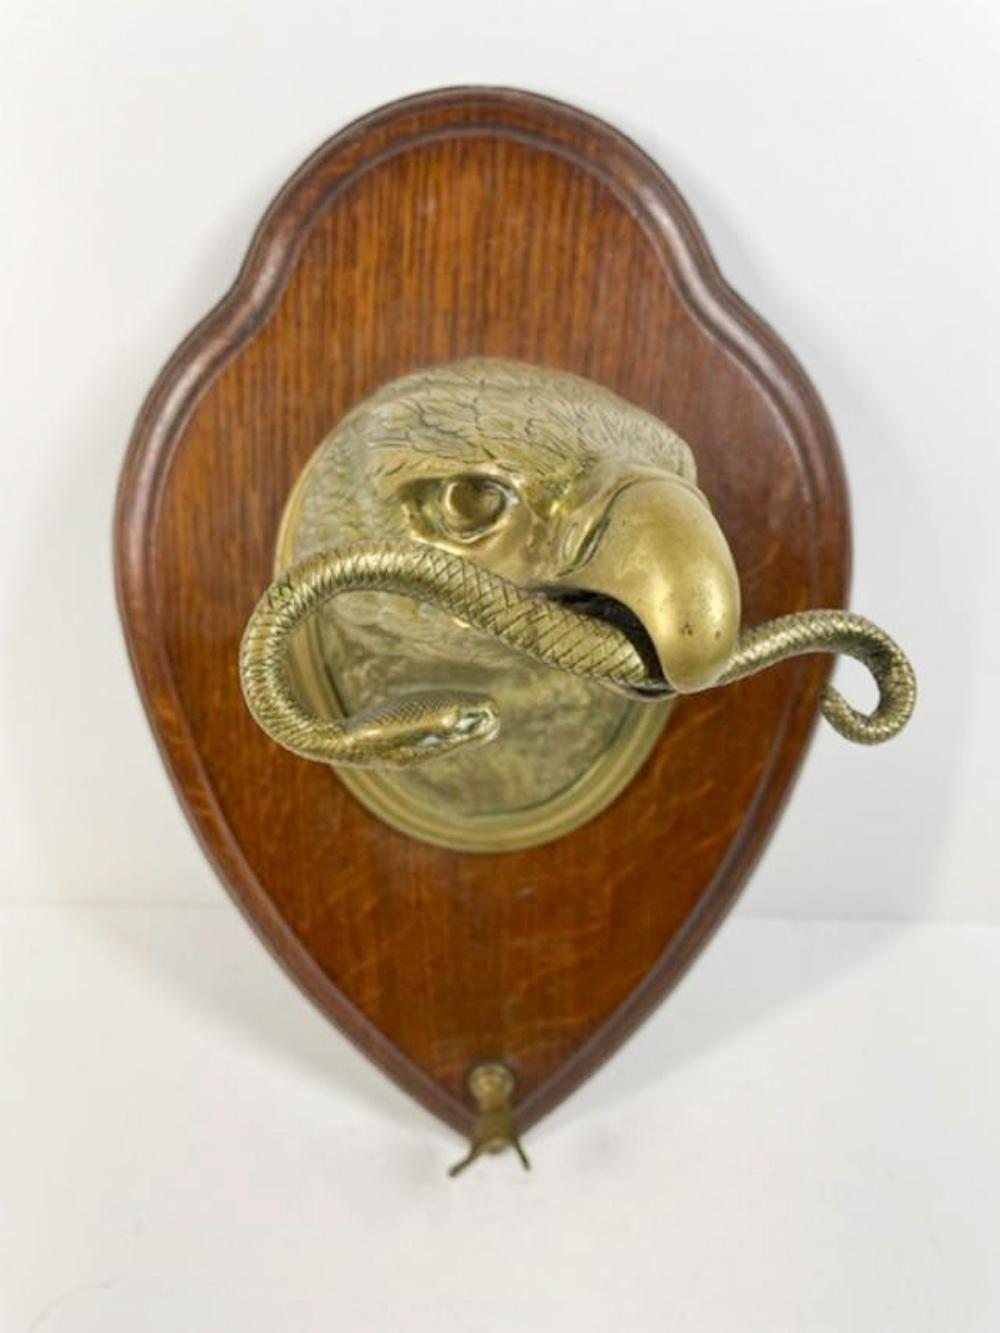 Wall Mounted Brass Eagle Head on Oak Plaque Holding a Dinner Gong by Wm. Tonks For Sale 1